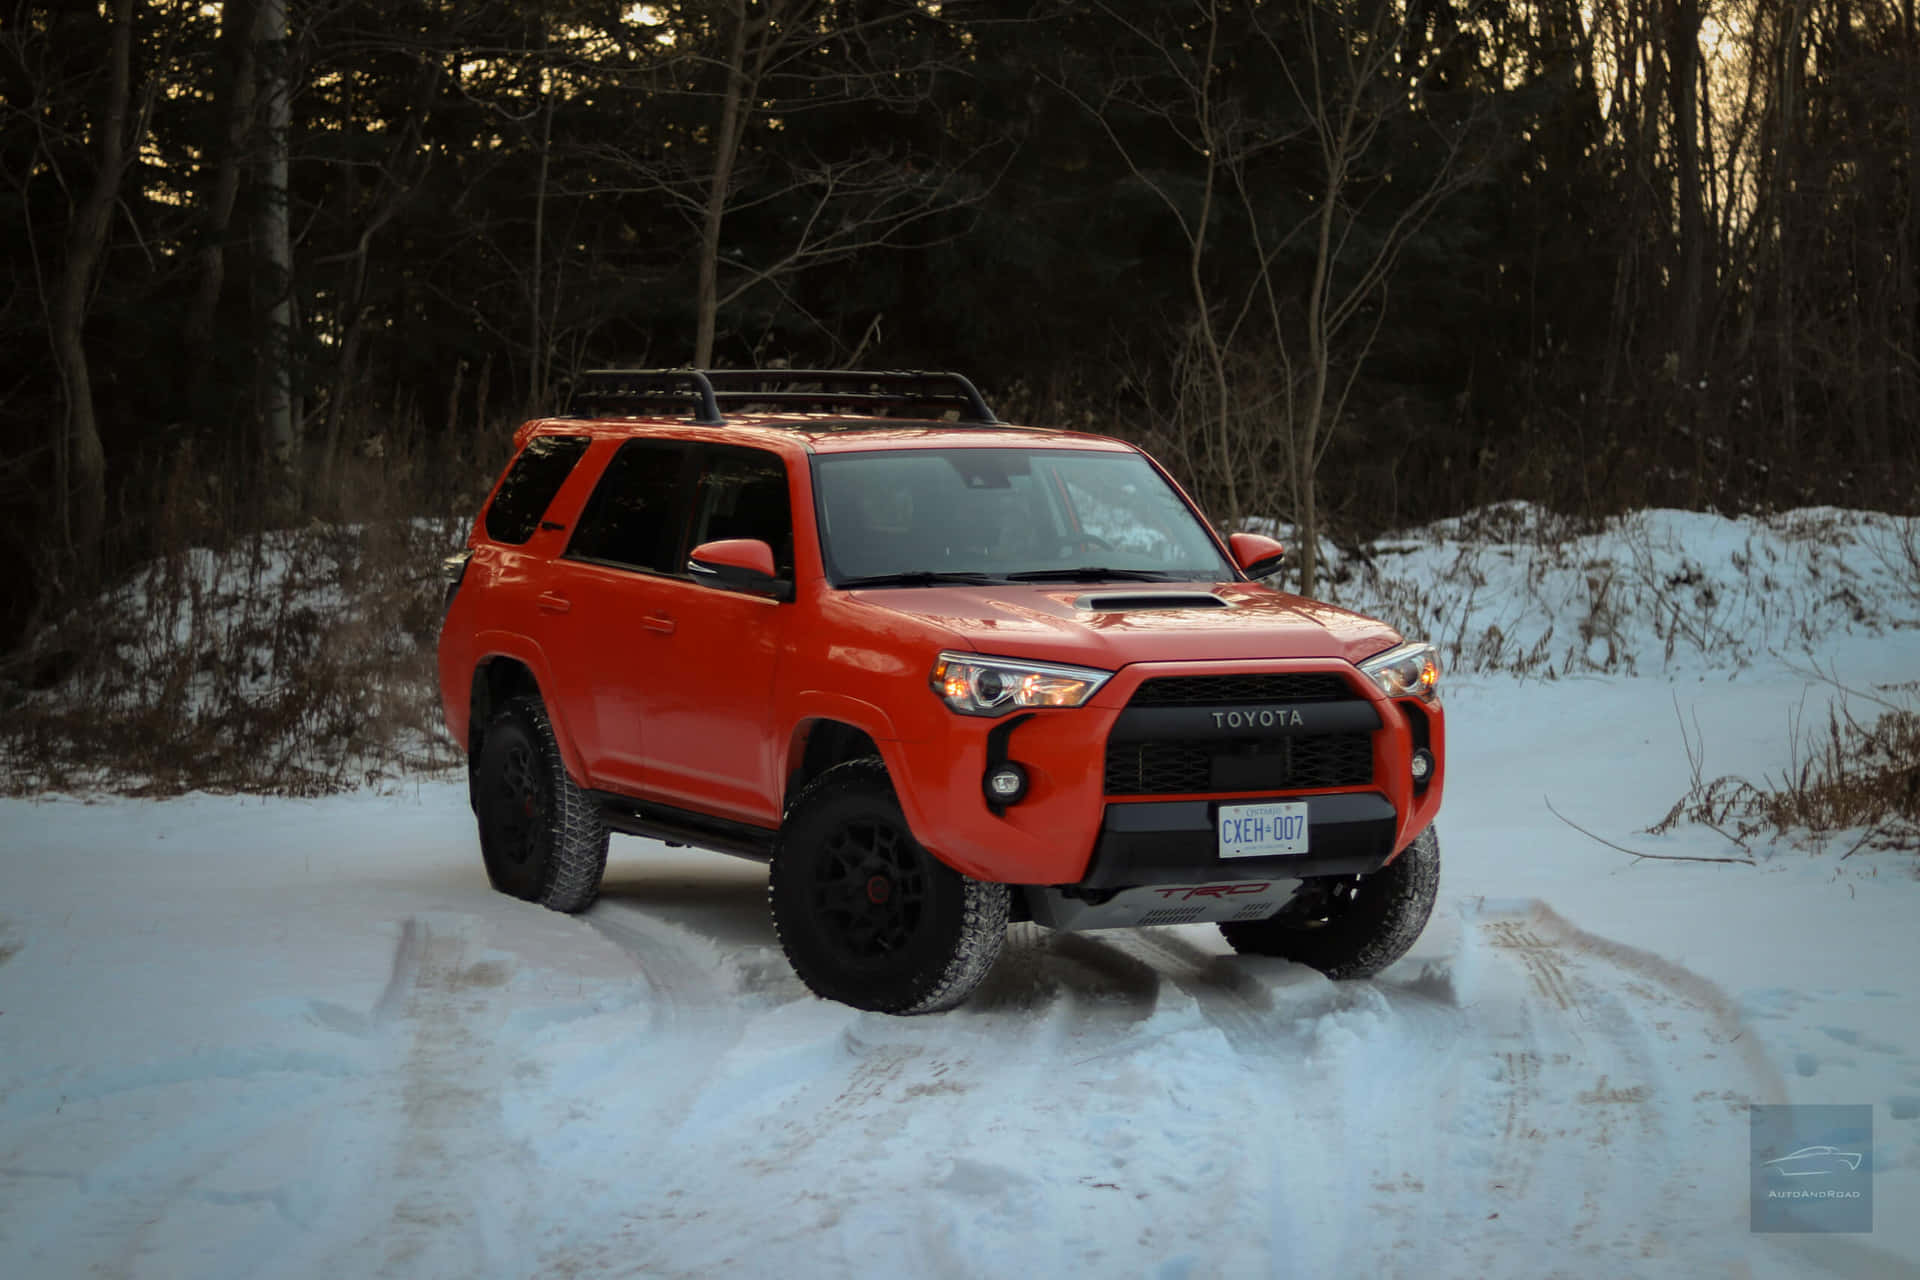 Introducing the All-New 2023 Toyota 4Runner: Tough, Trail-Ready and Re-engineered for Comfort and Power